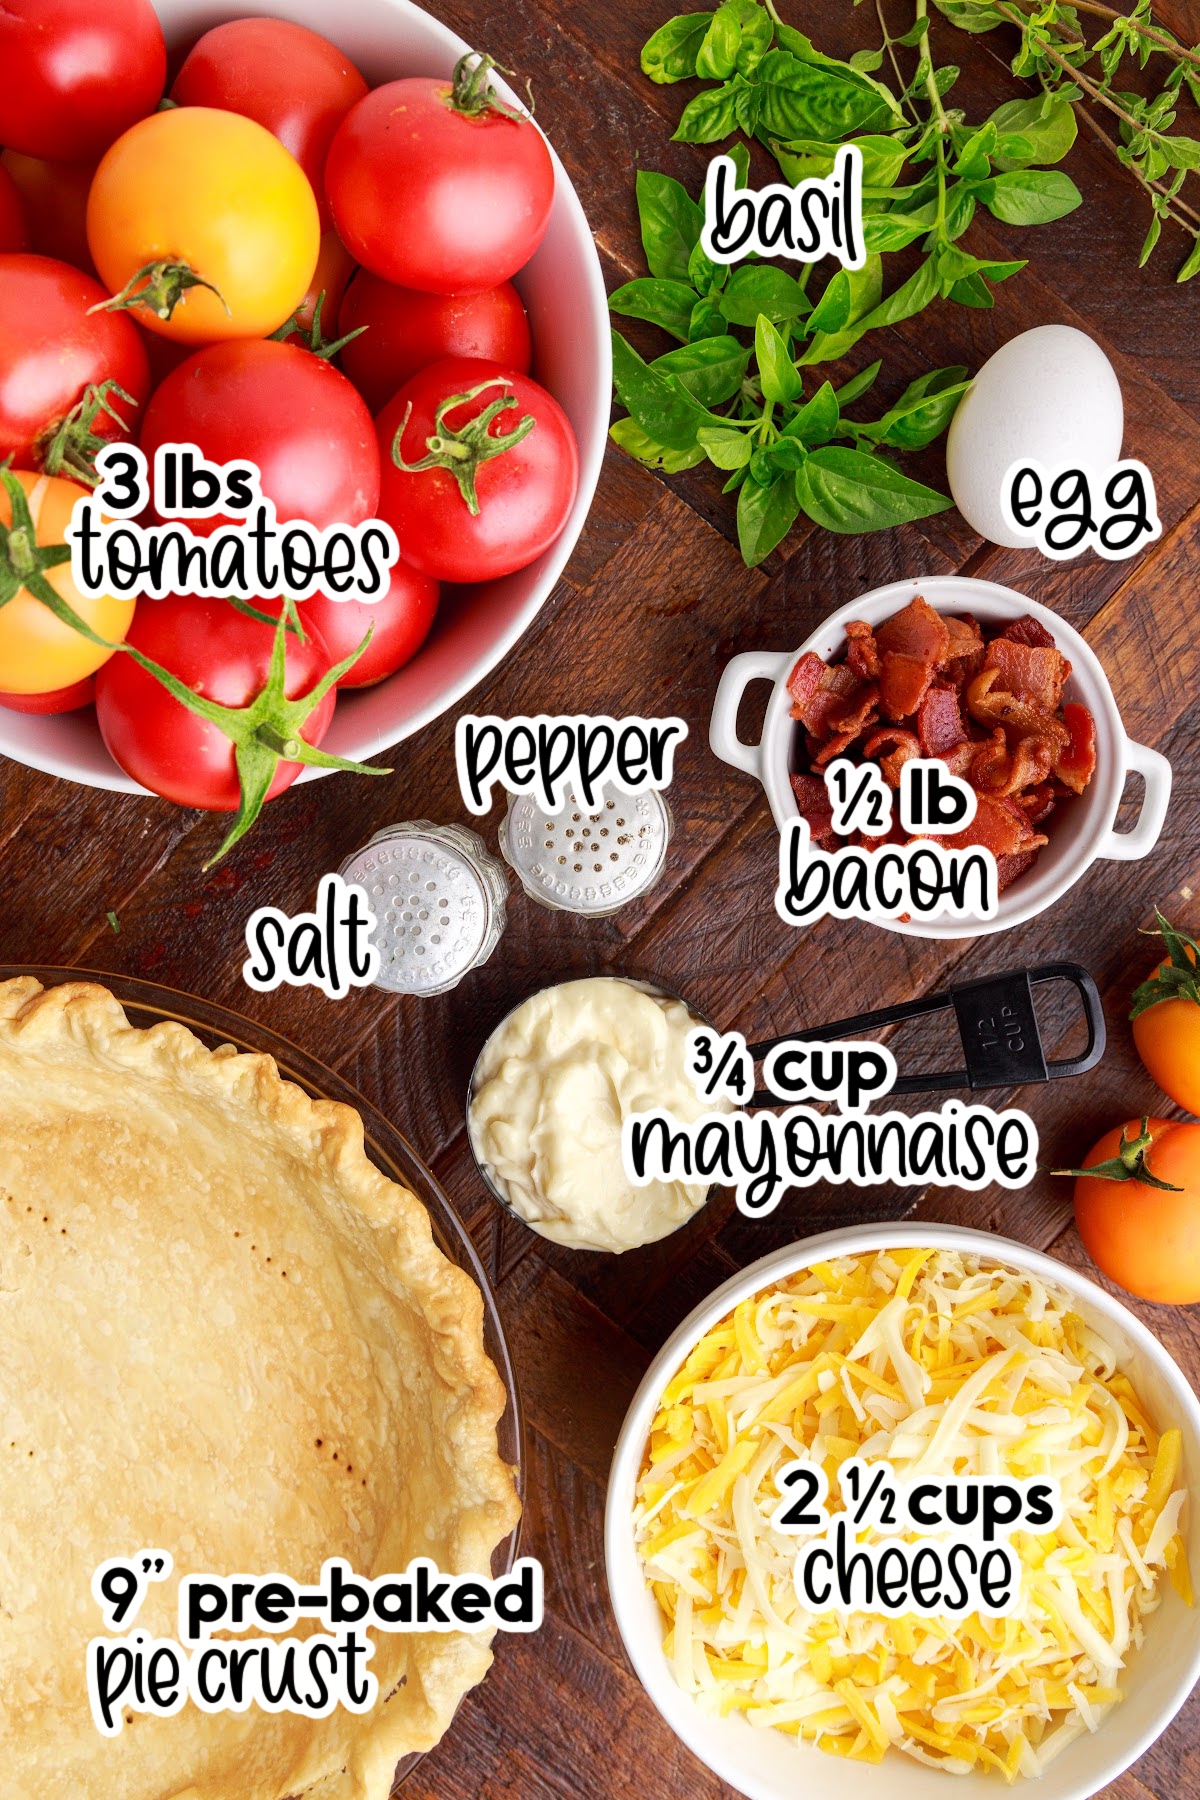 Individual ingredients set out that are needed to make southern tomato pie, with text amounts and labels.